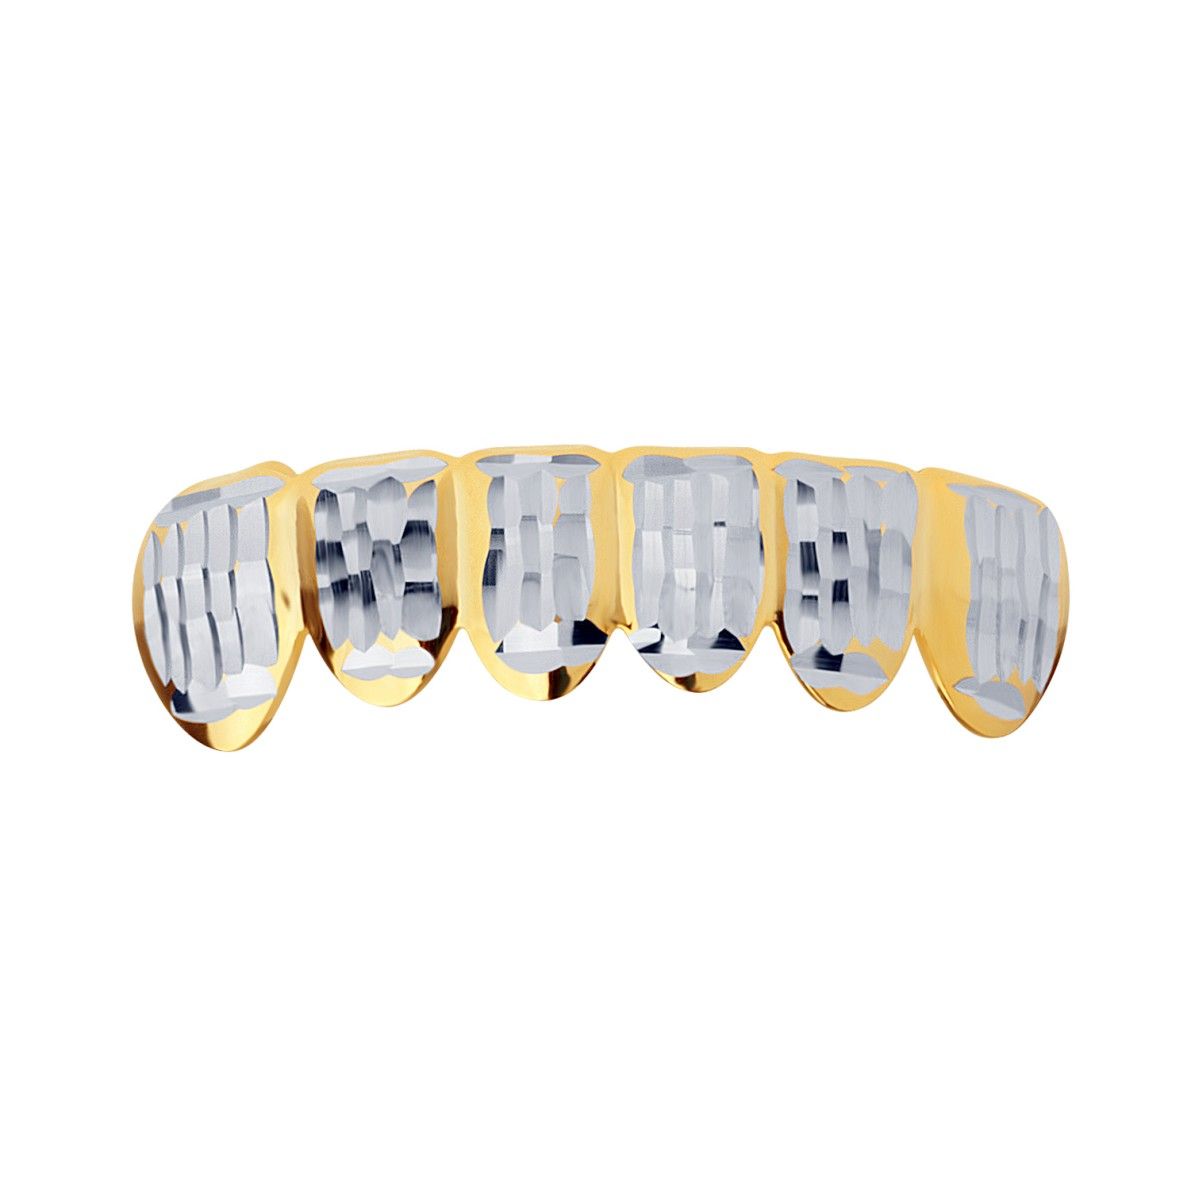 Gold Grillz - One size fits all - Diamond Cut ONE - Bottom